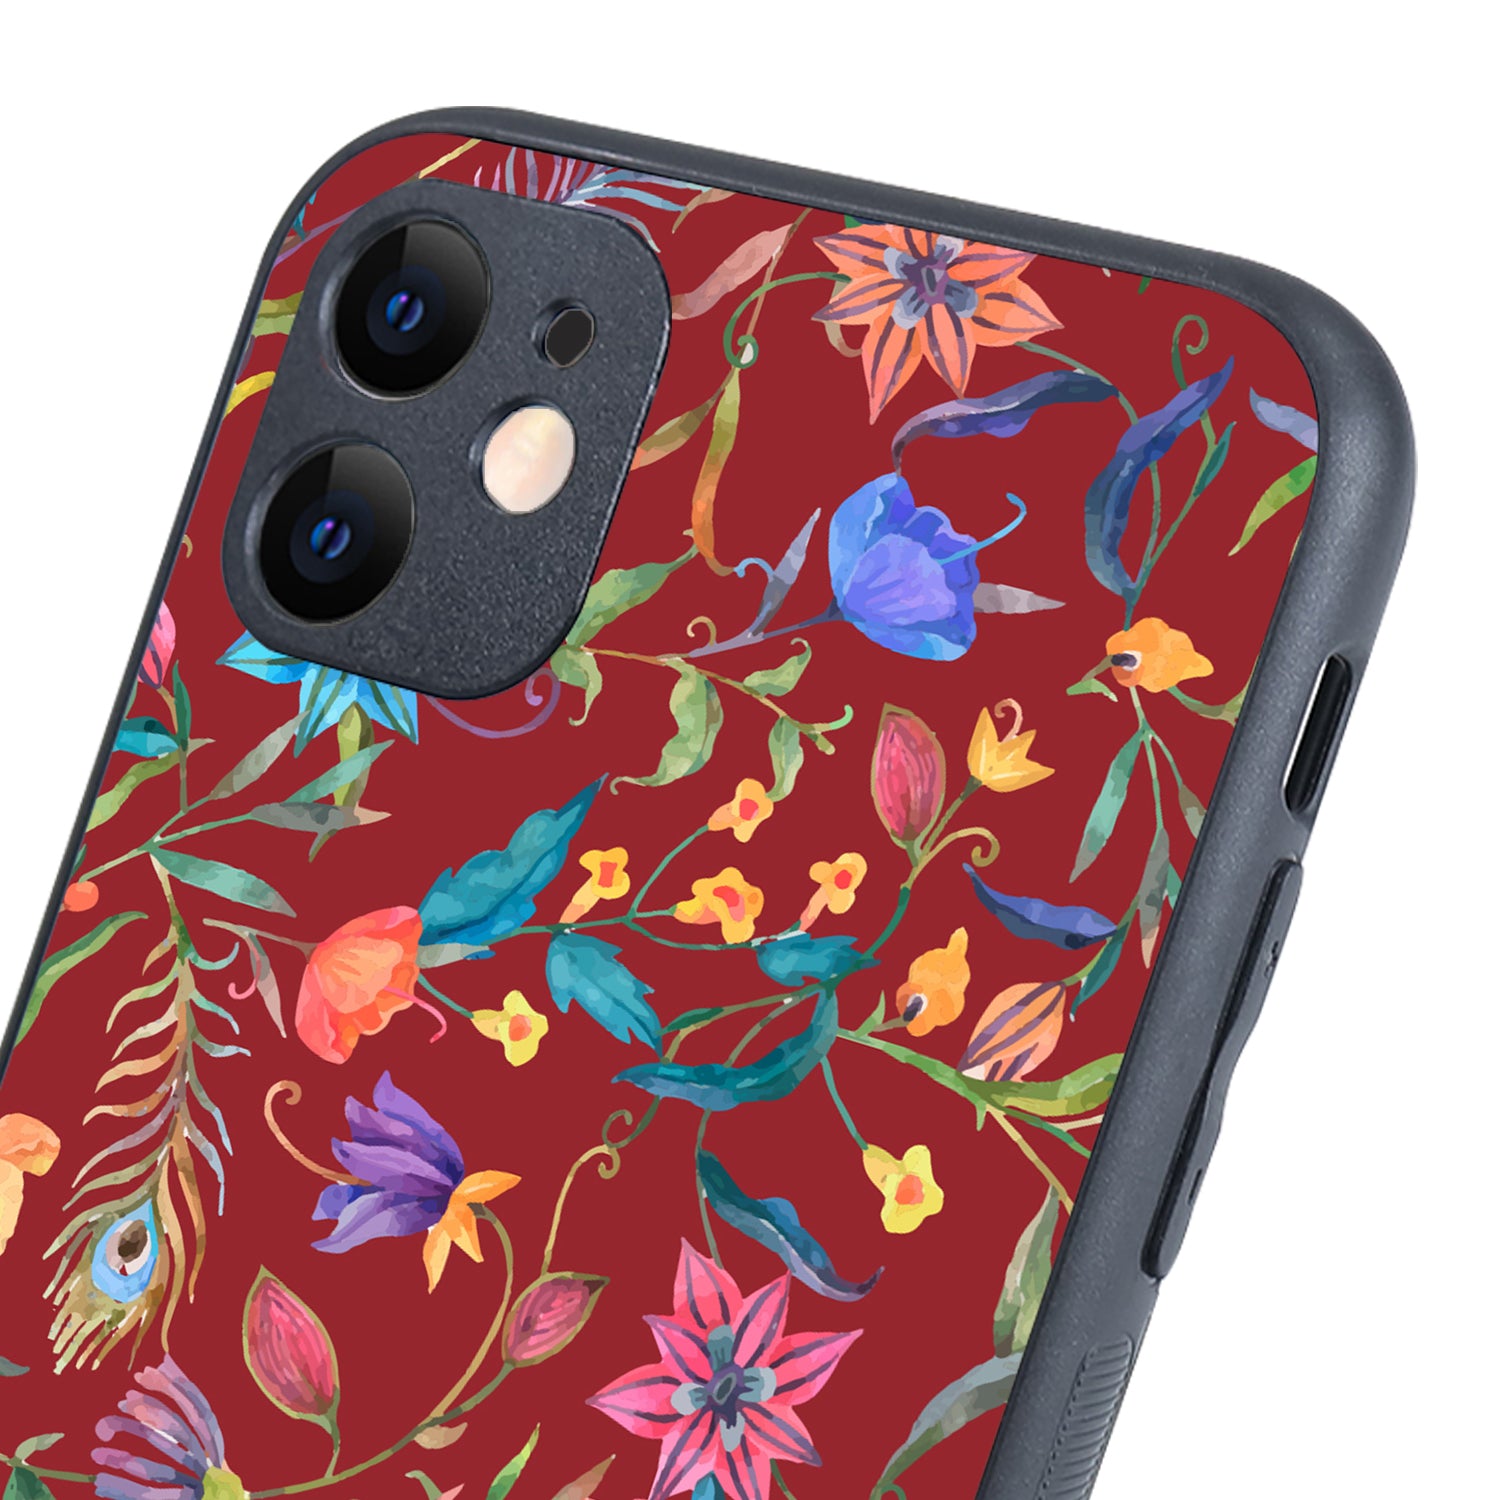 Red Doodle Floral iPhone 11 Case